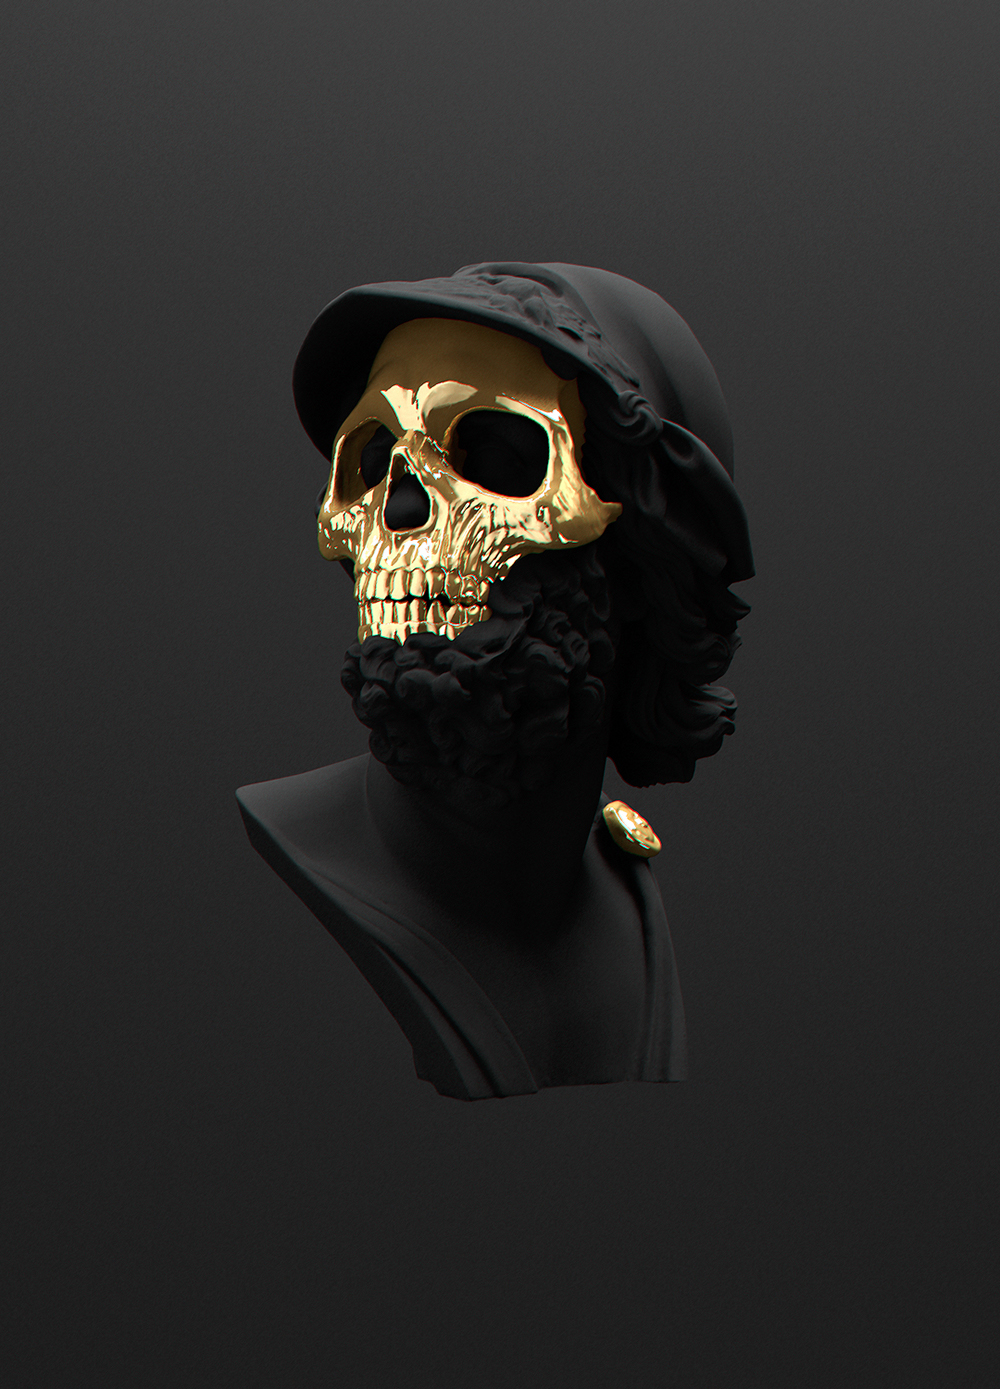 All black but gold by Andre Larcev